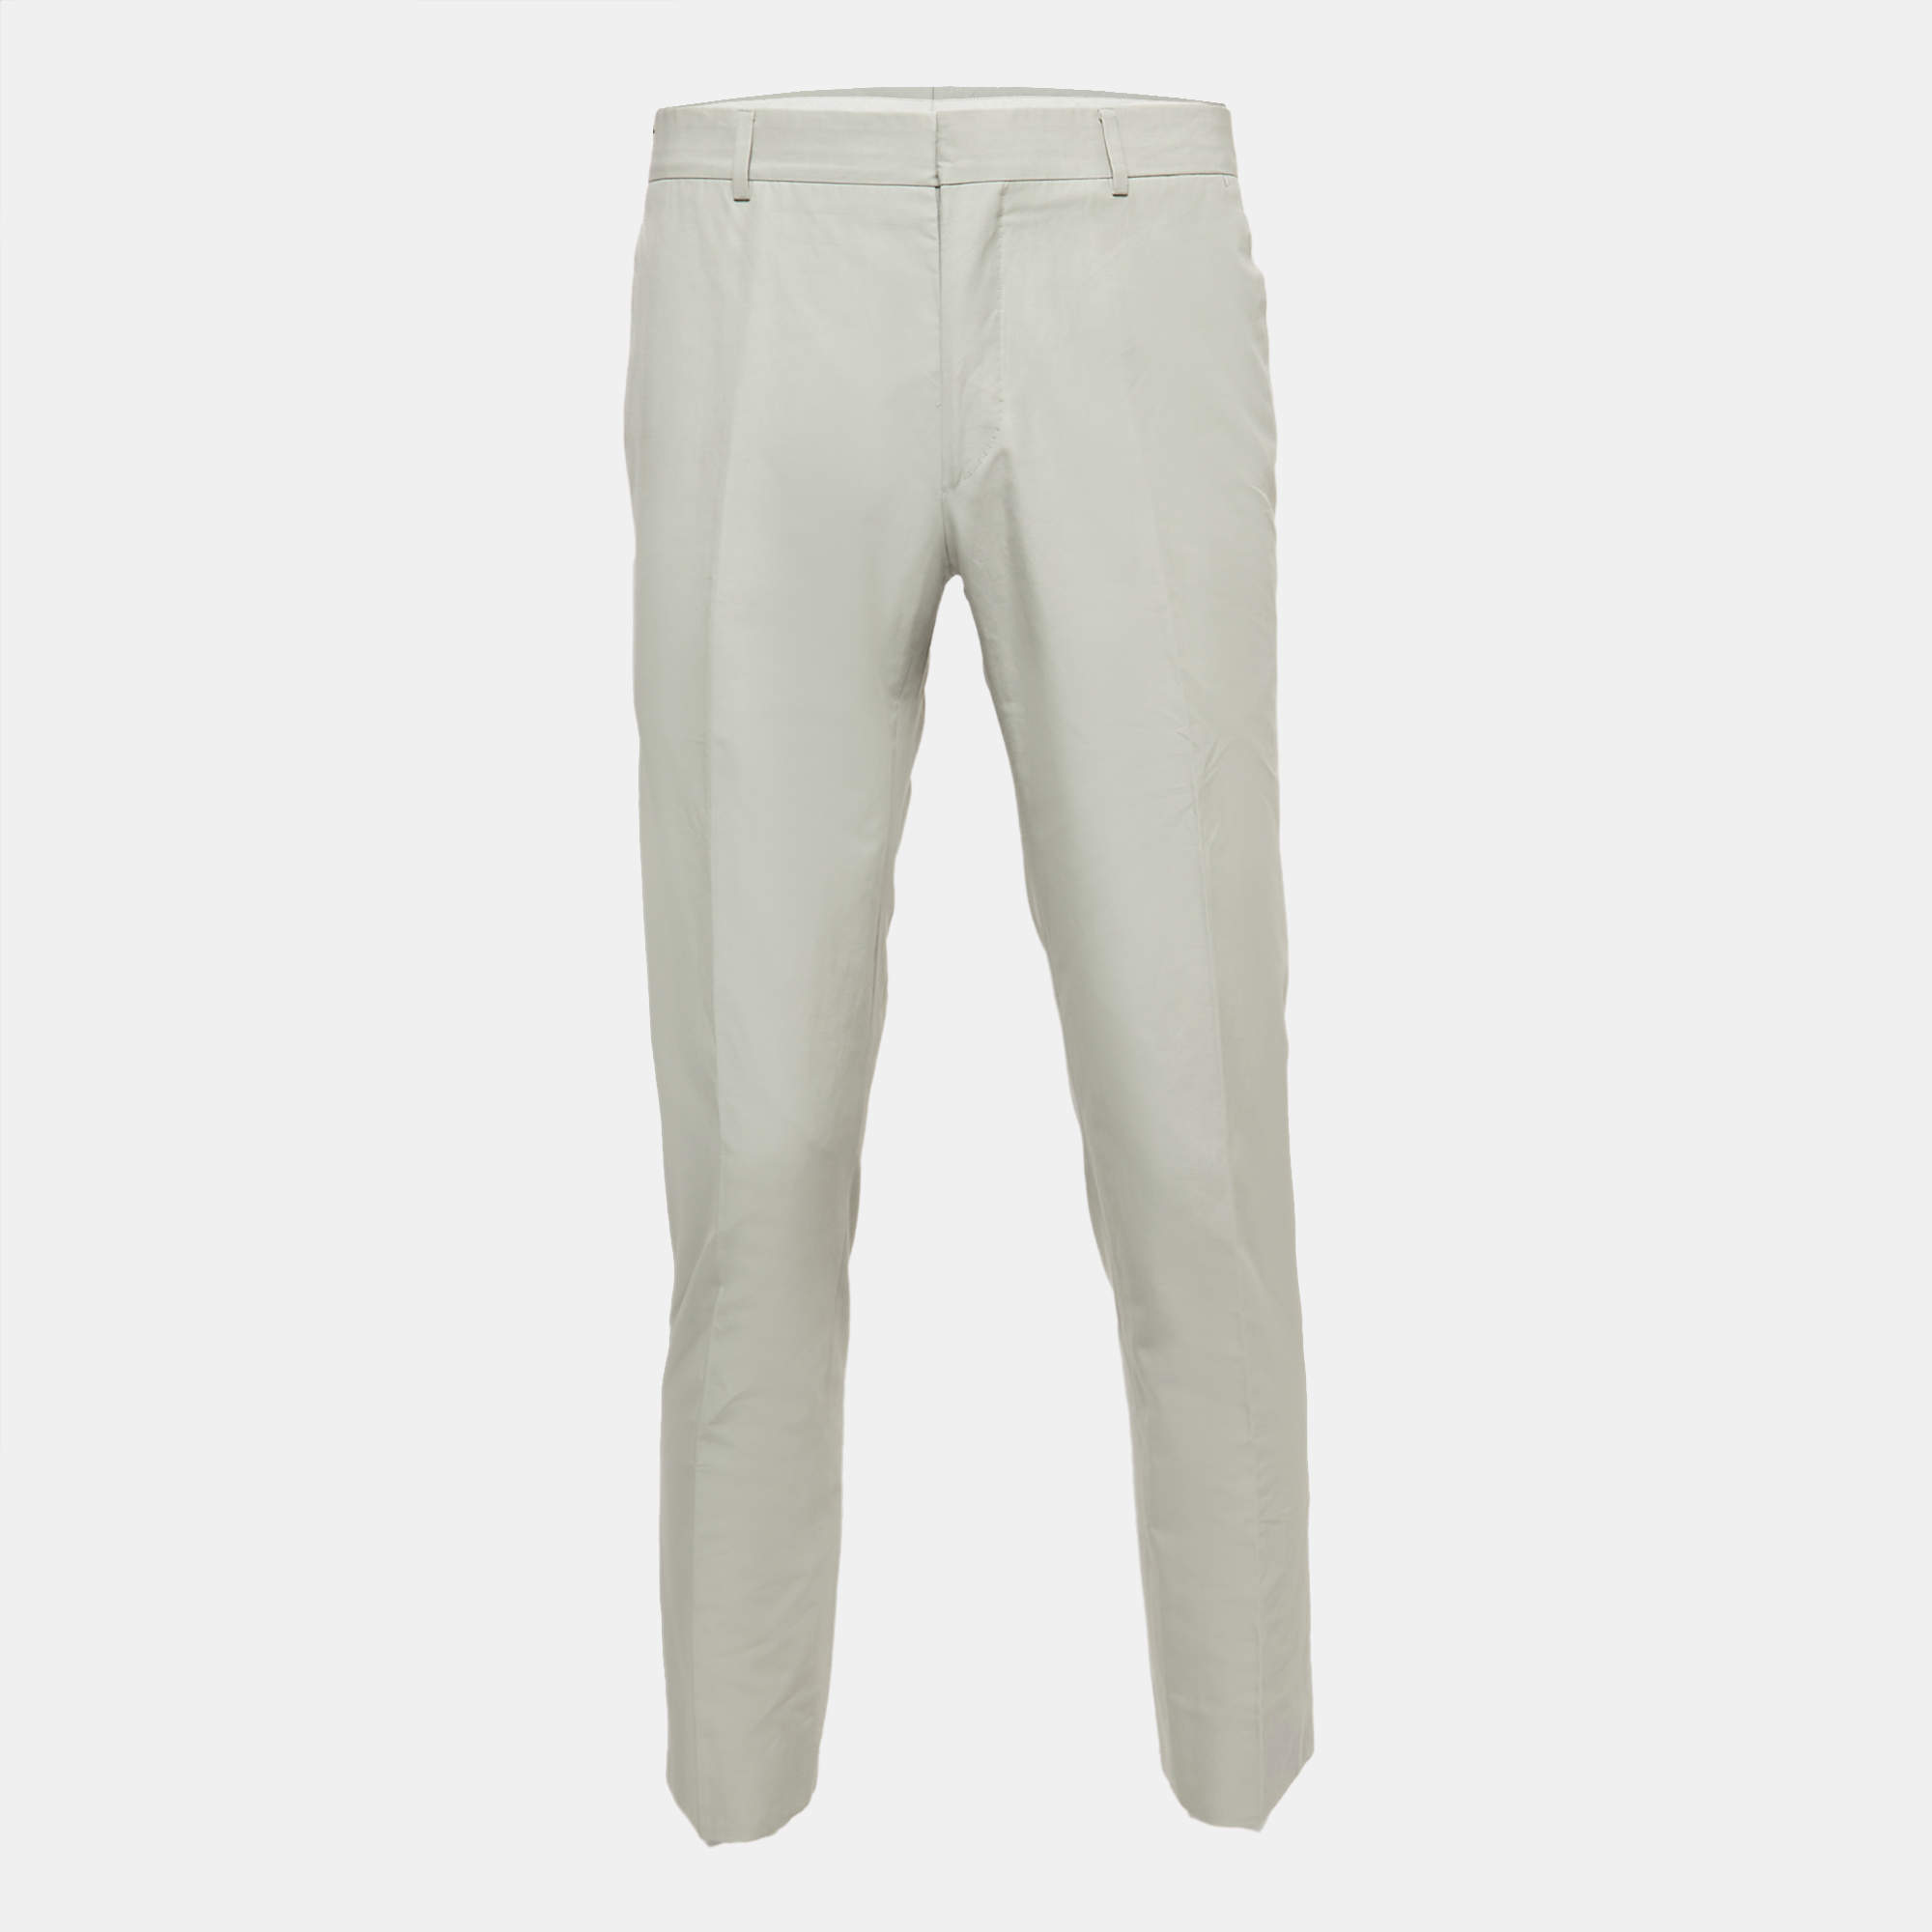 Hermes Light Grey Cotton Blend Tailored Trousers L